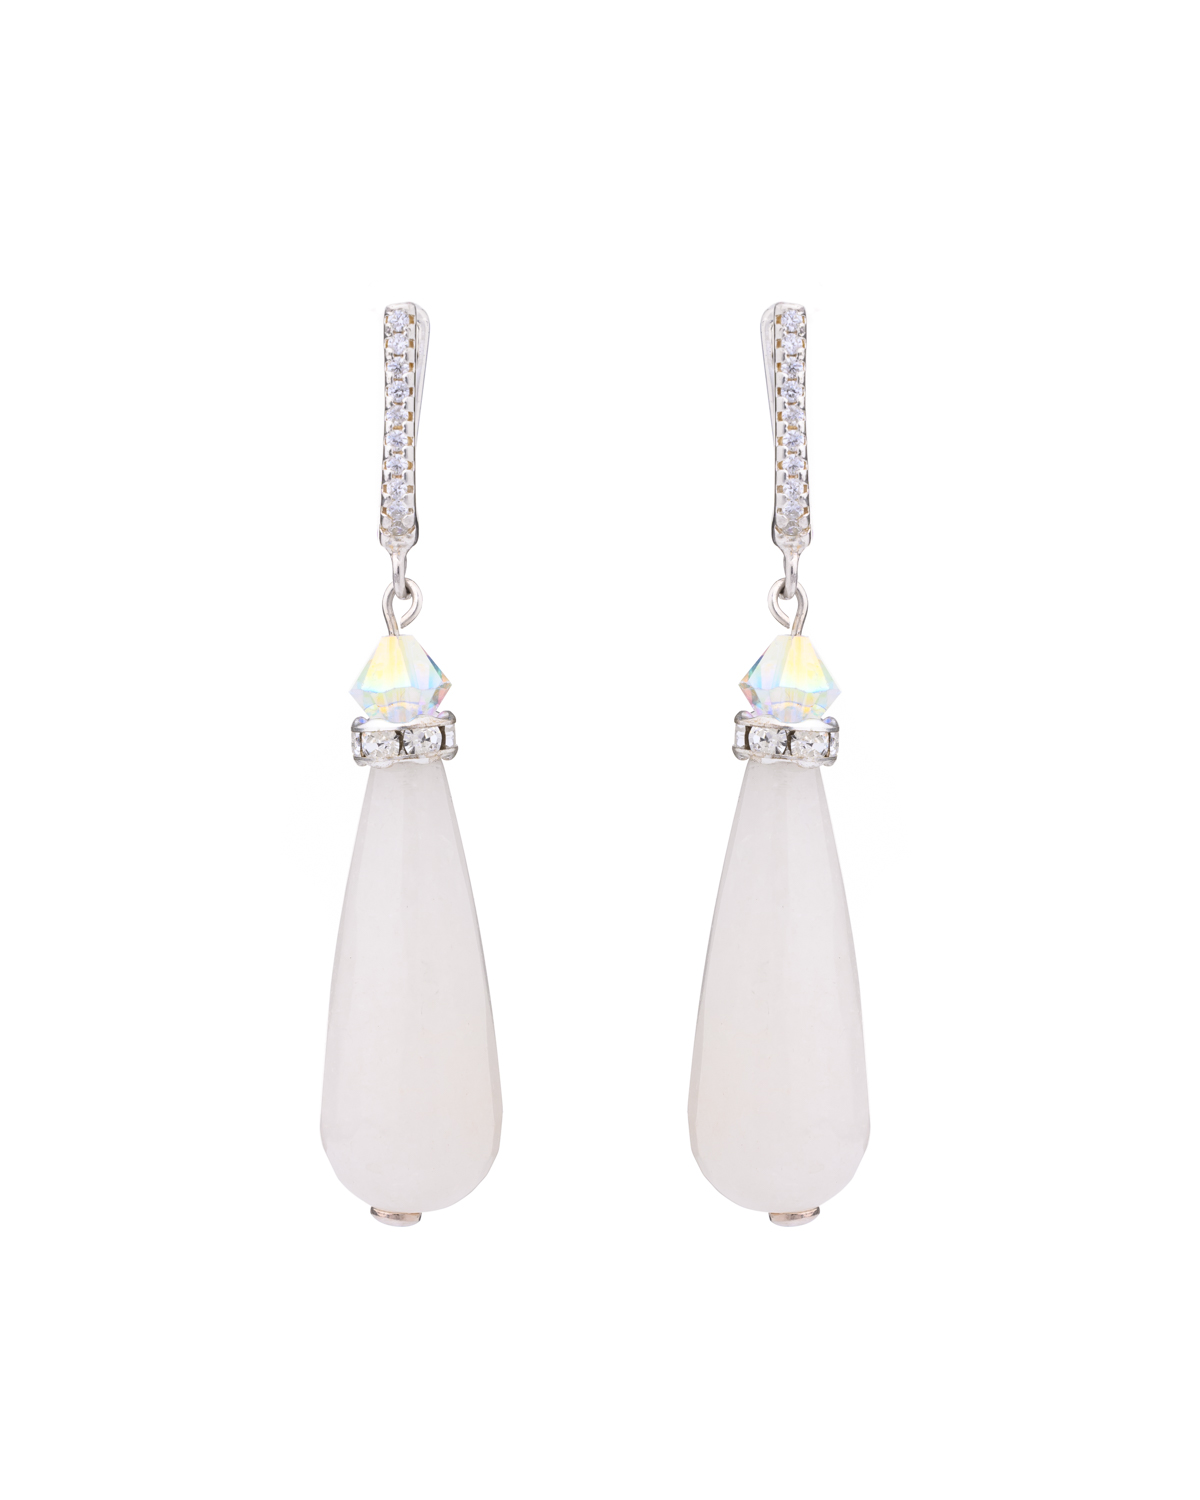 Drop Silver Earrings – Ivory color – Cubic Zirconia Leverback